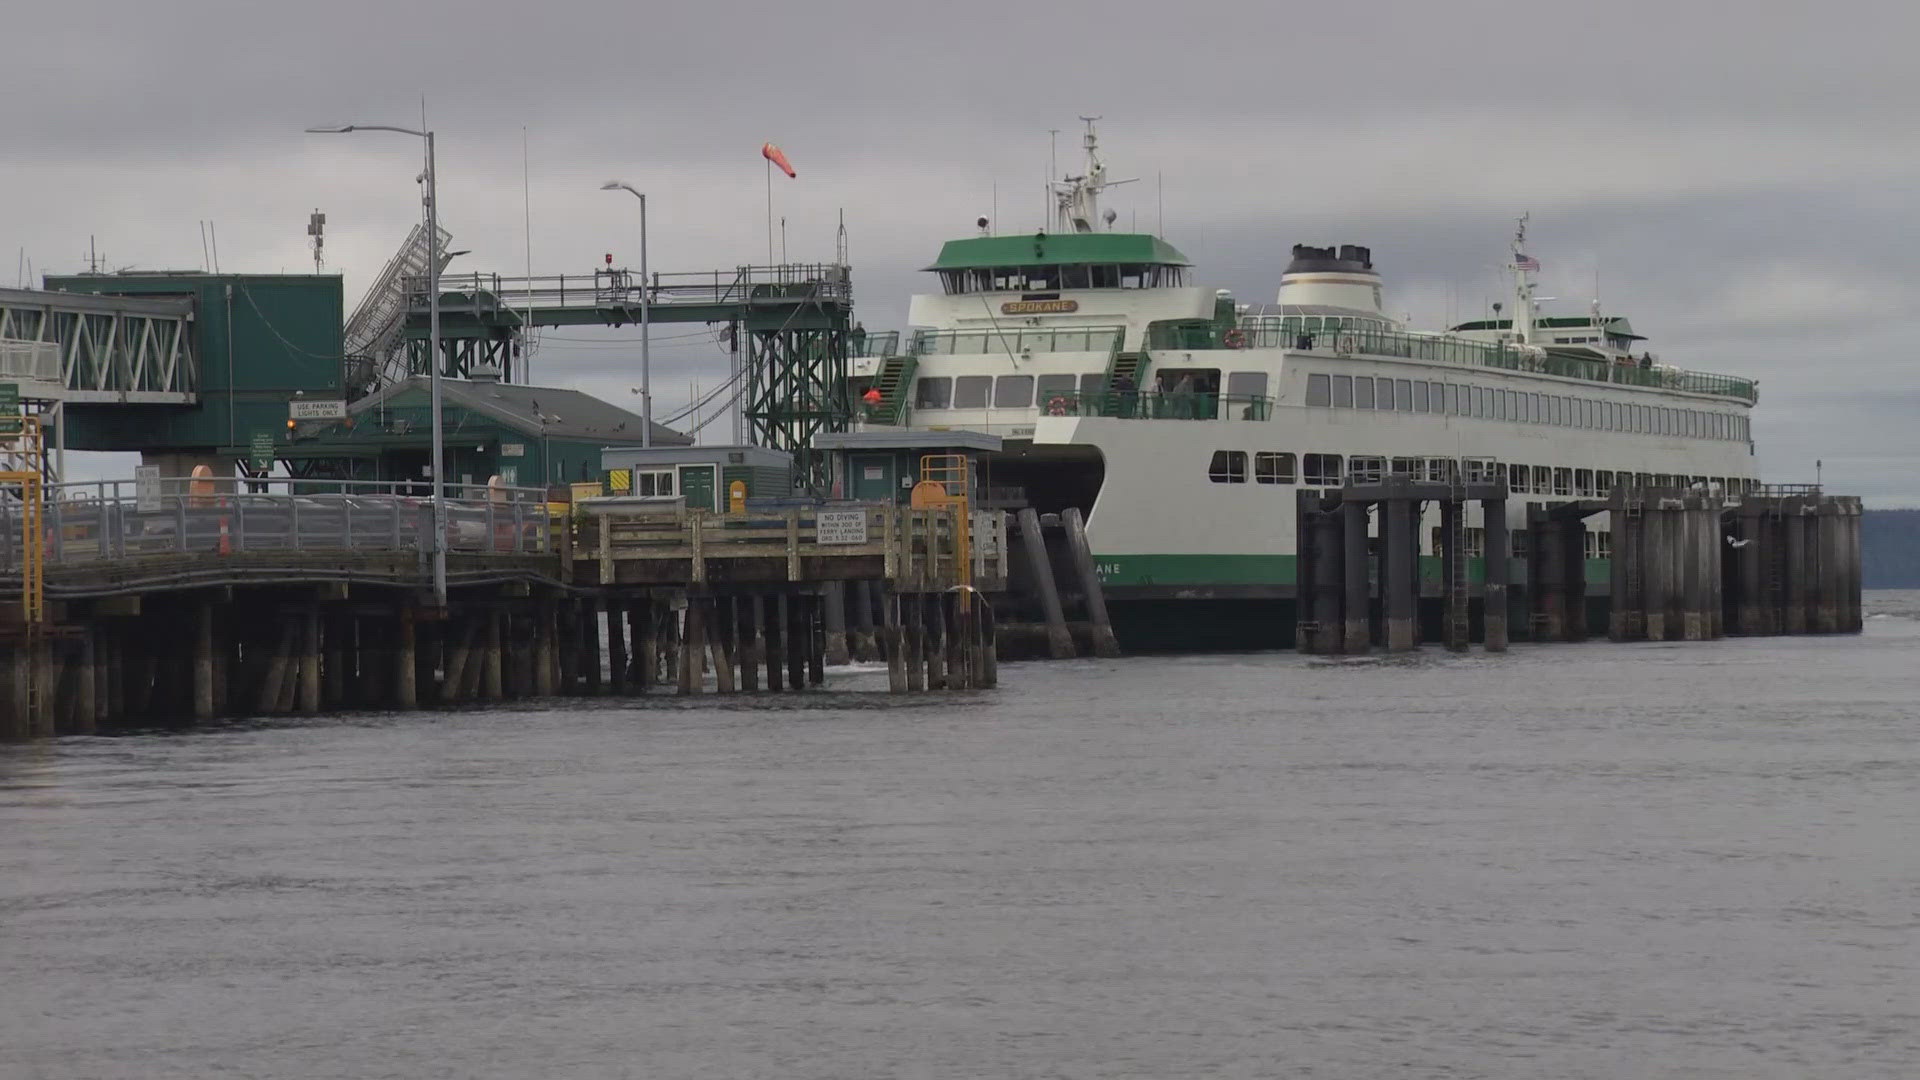 Washington State Ferries has 21 boats in its fleet, but only 15 are in service currently. They need 26 boats to have services fully restored.